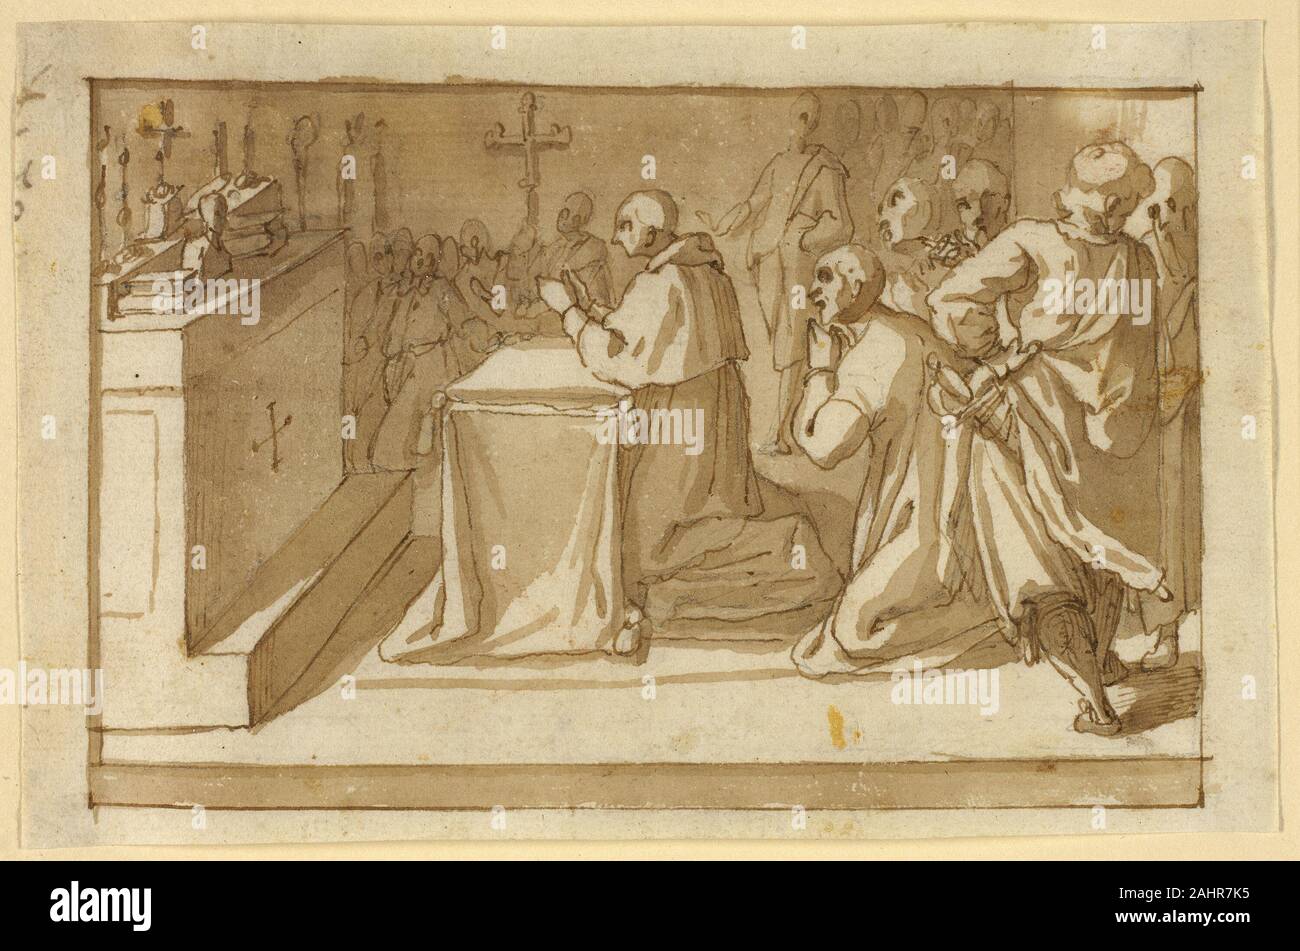 Cesare Nebbia. Saint Charles Borromeo Venerating the Relics. 1600–1609. Italy. Pen and brown ink, with brush and brown wash, over graphite, on cream laid paper Louise Smith Bross, who died in 1996 at the age of 57, was a longtime member of the Woman’s Board of the Art Institute and one of the founders of both the Auxiliary Board and the Old Masters Society. In 1994 she received her doctorate from the University of Chicago with a dissertation, “The Church of Santo Spirito in Sassia A Study in the Development of Art, Architecture, and Patronage in Counter-Reformation Rome.” The eight drawings th Stock Photo